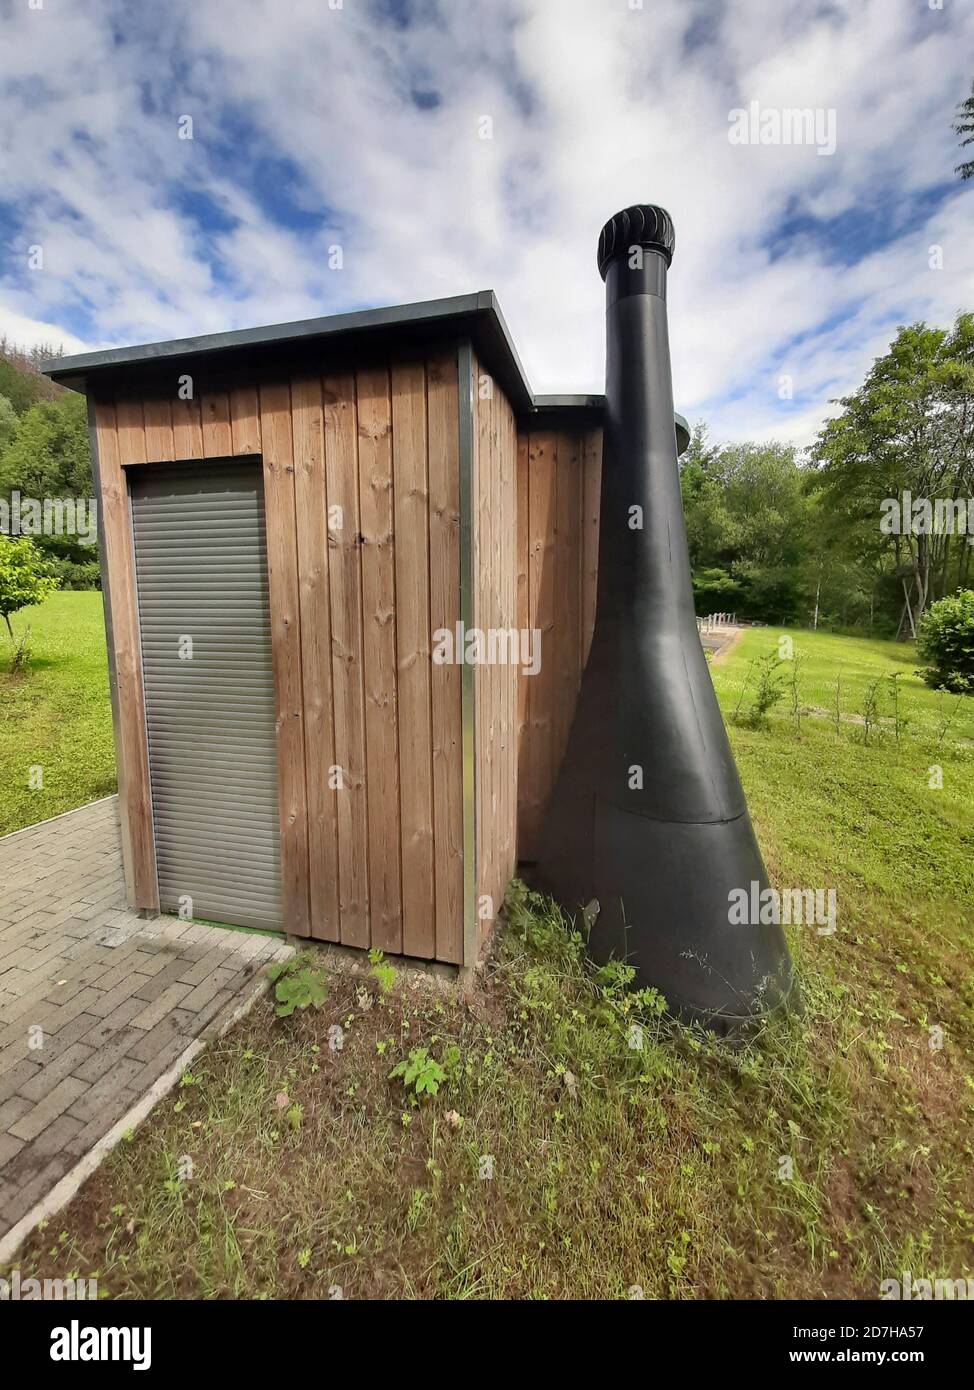 handicapped accessible compost toilet, Germany Stock Photo